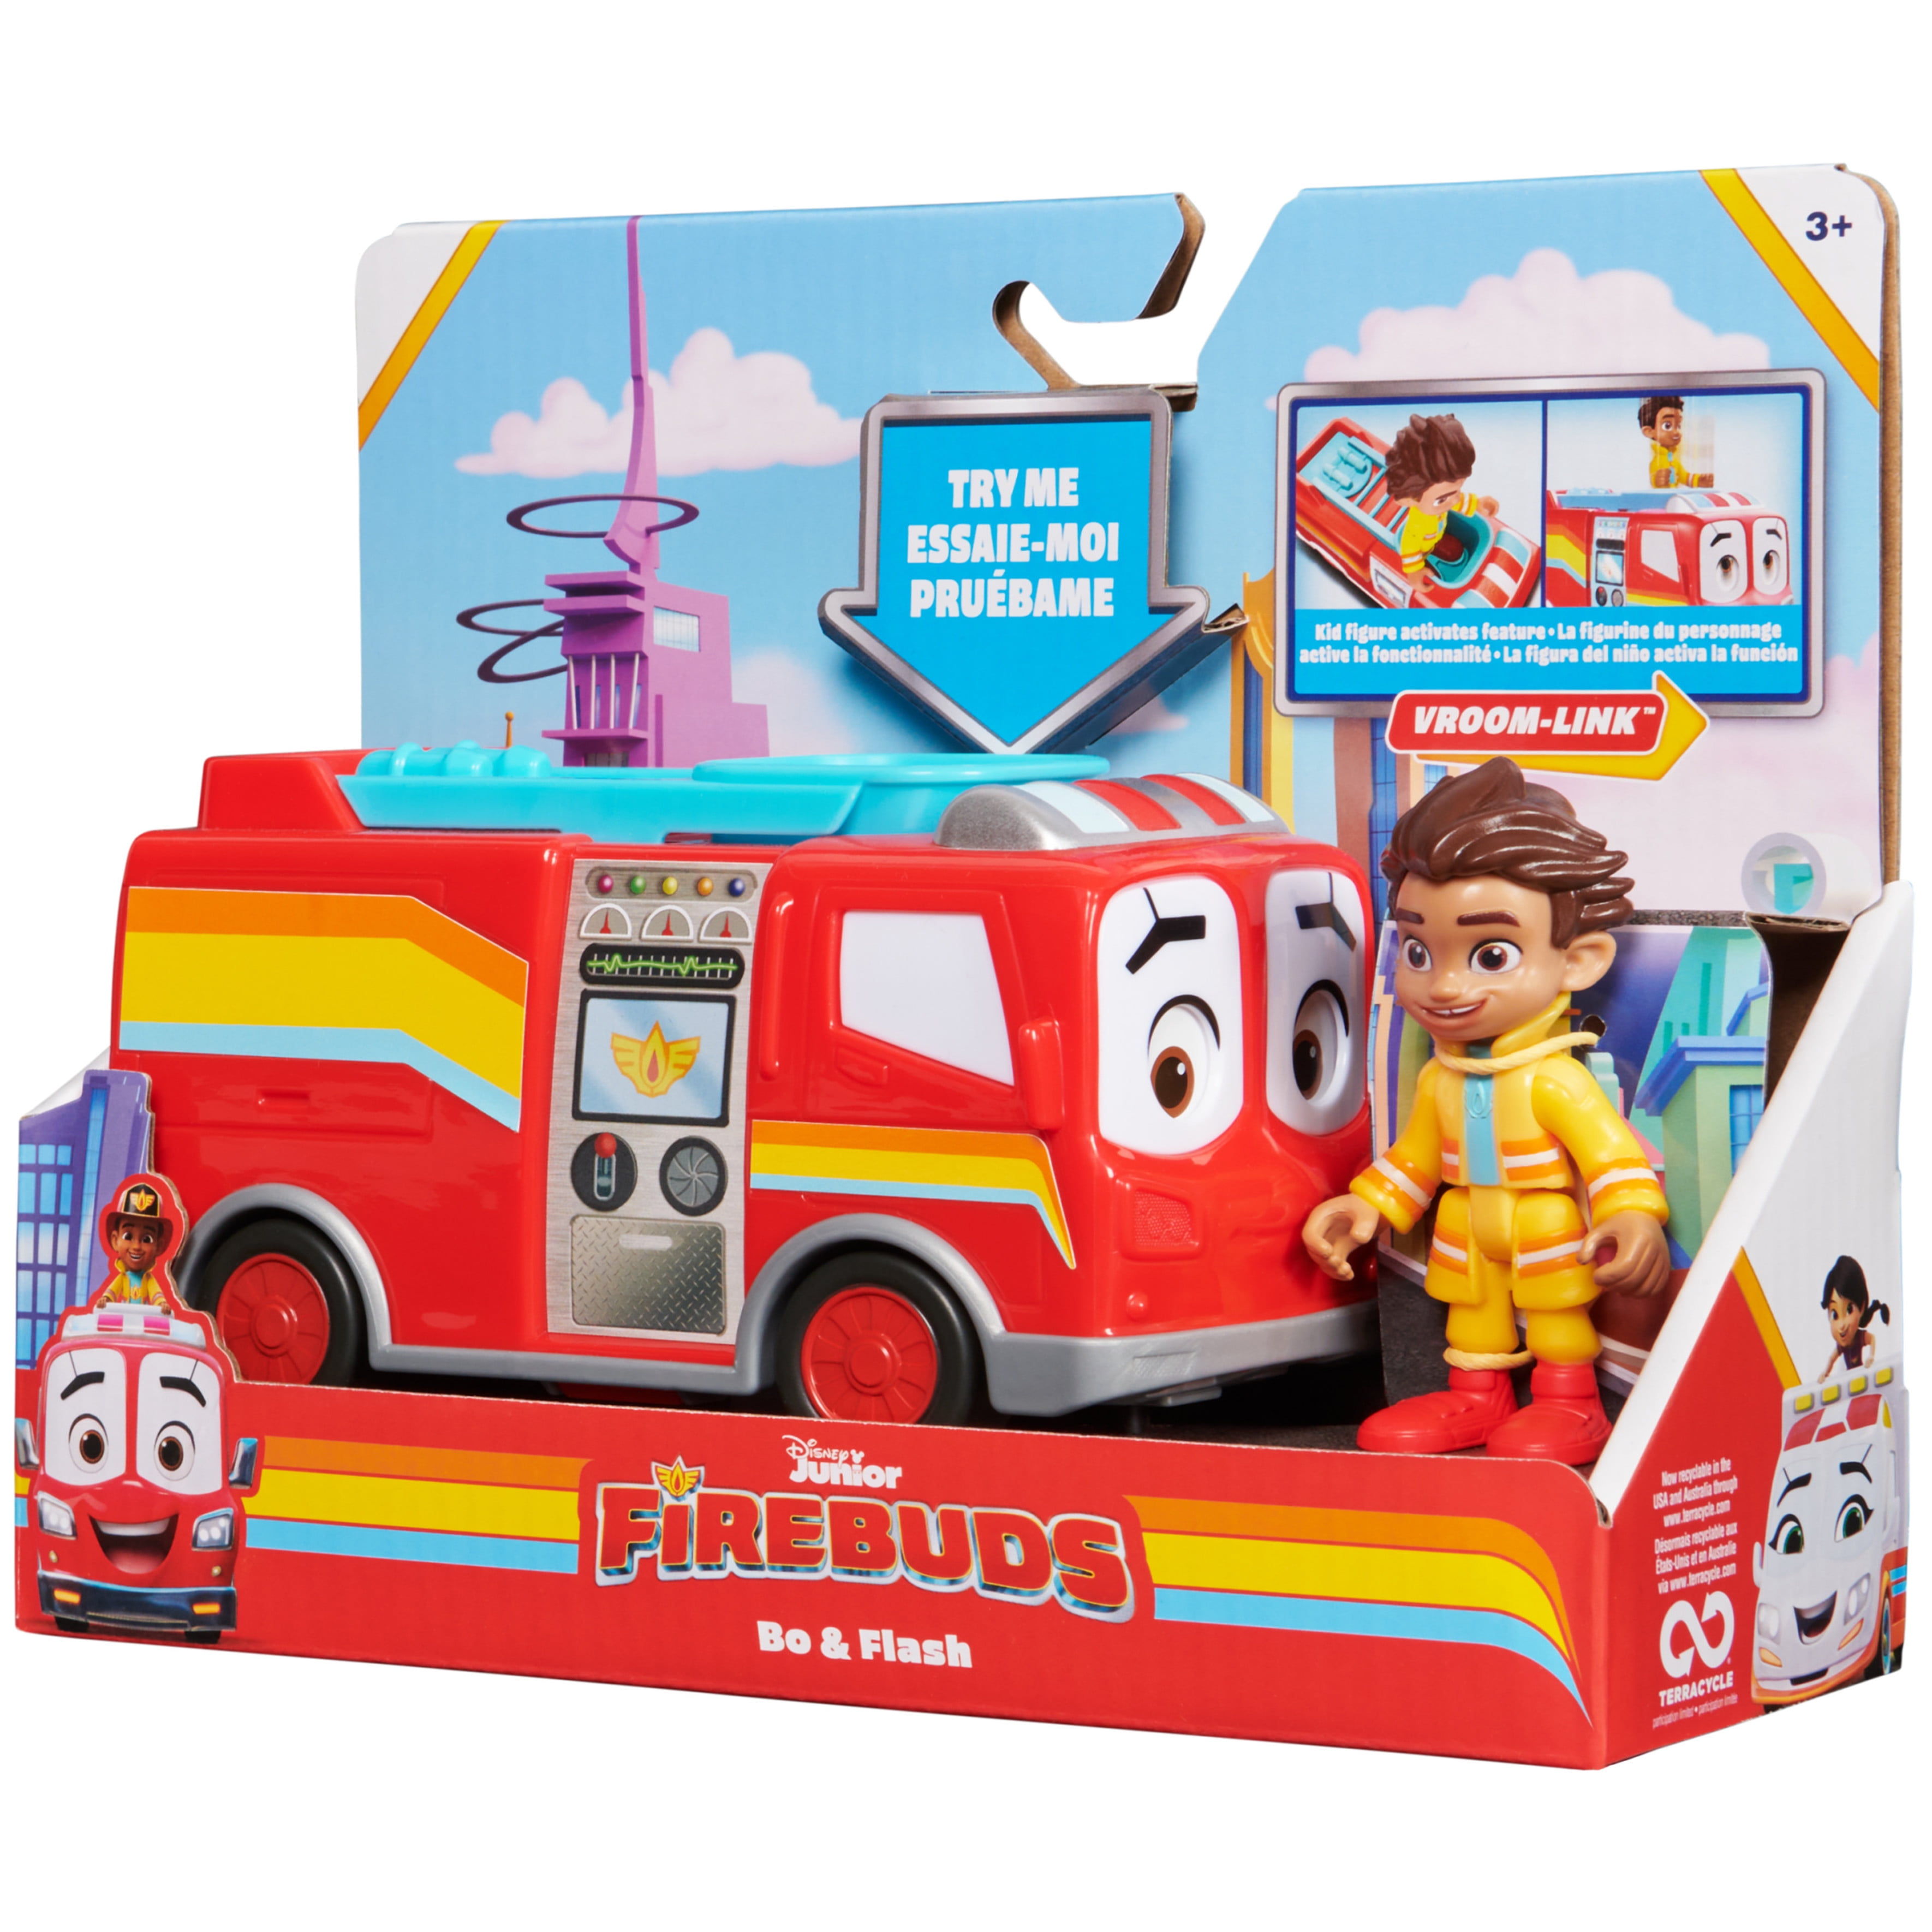 Disney Junior Firebuds Action Figures Gift Pack $4 (Reg. $15) - with 3  Collectible Kids Toys - Fabulessly Frugal